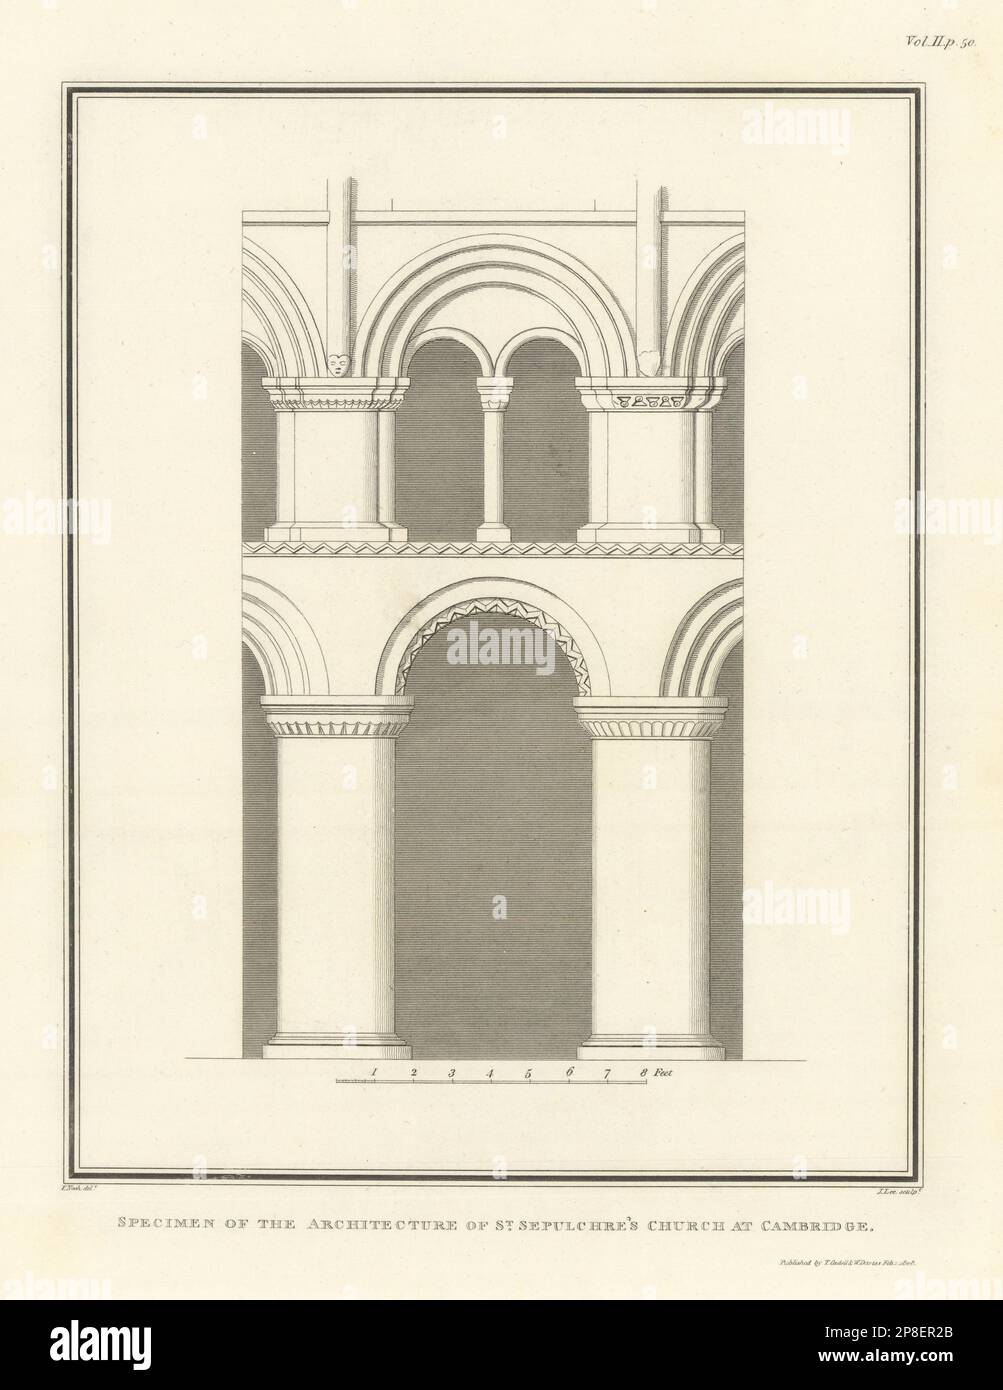 Specimen of the architecture of St. Sepulchre's Church at Cambridge. NASH 1810 Stock Photo